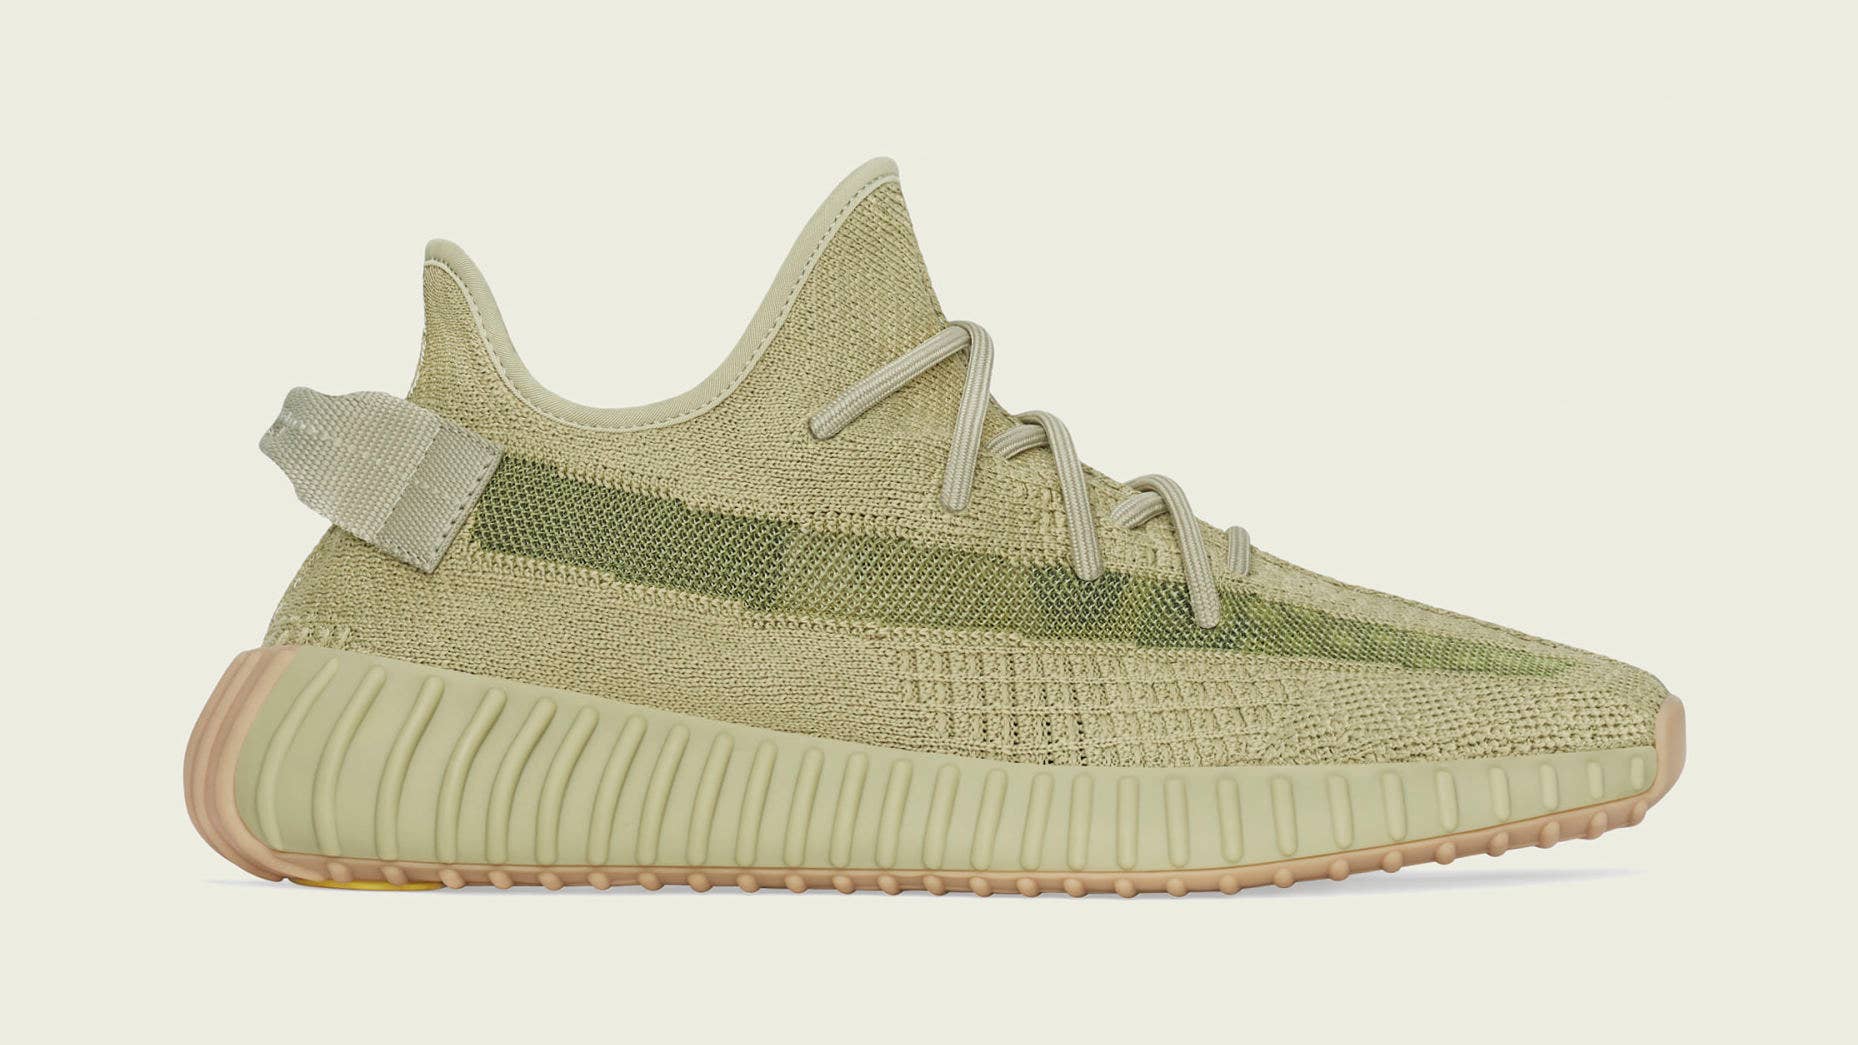 Adidas Yeezy Boost 350 V2 'Sulfur' FY5346 Lateral